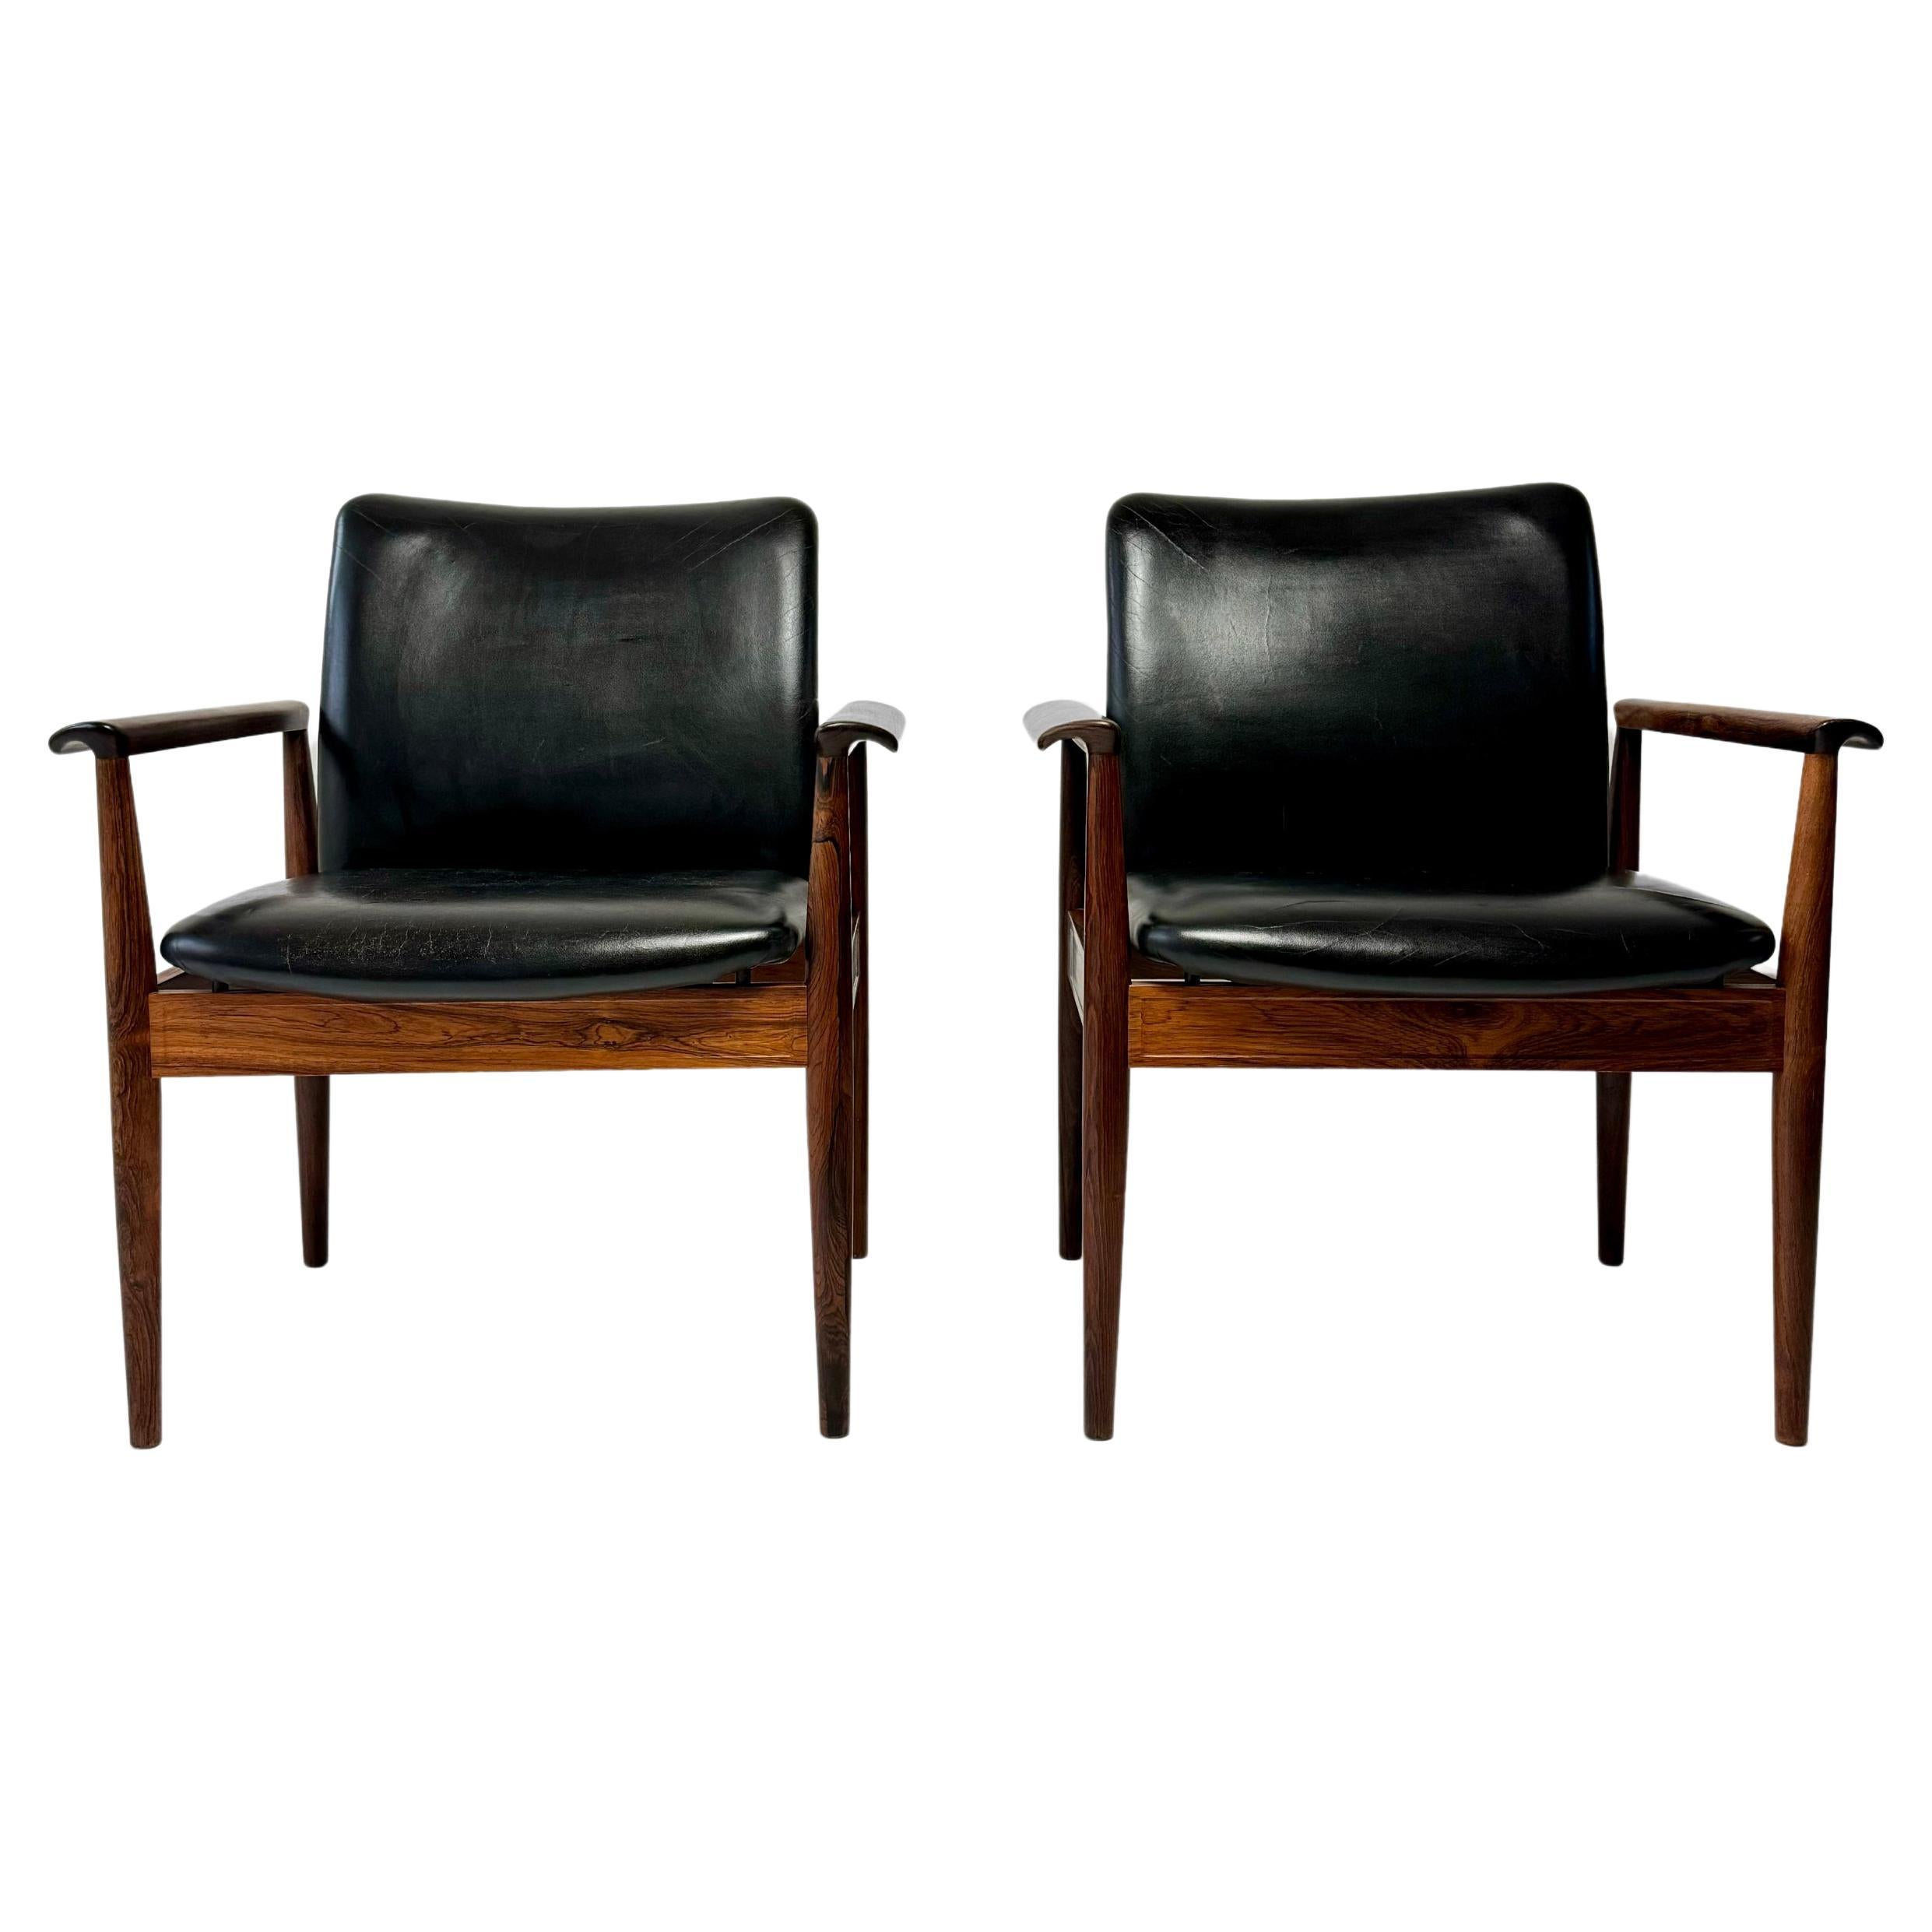 Set of Diplomat Armchairs in Rosewood and Leather by Finn Juhl, Denmark c.1960's For Sale